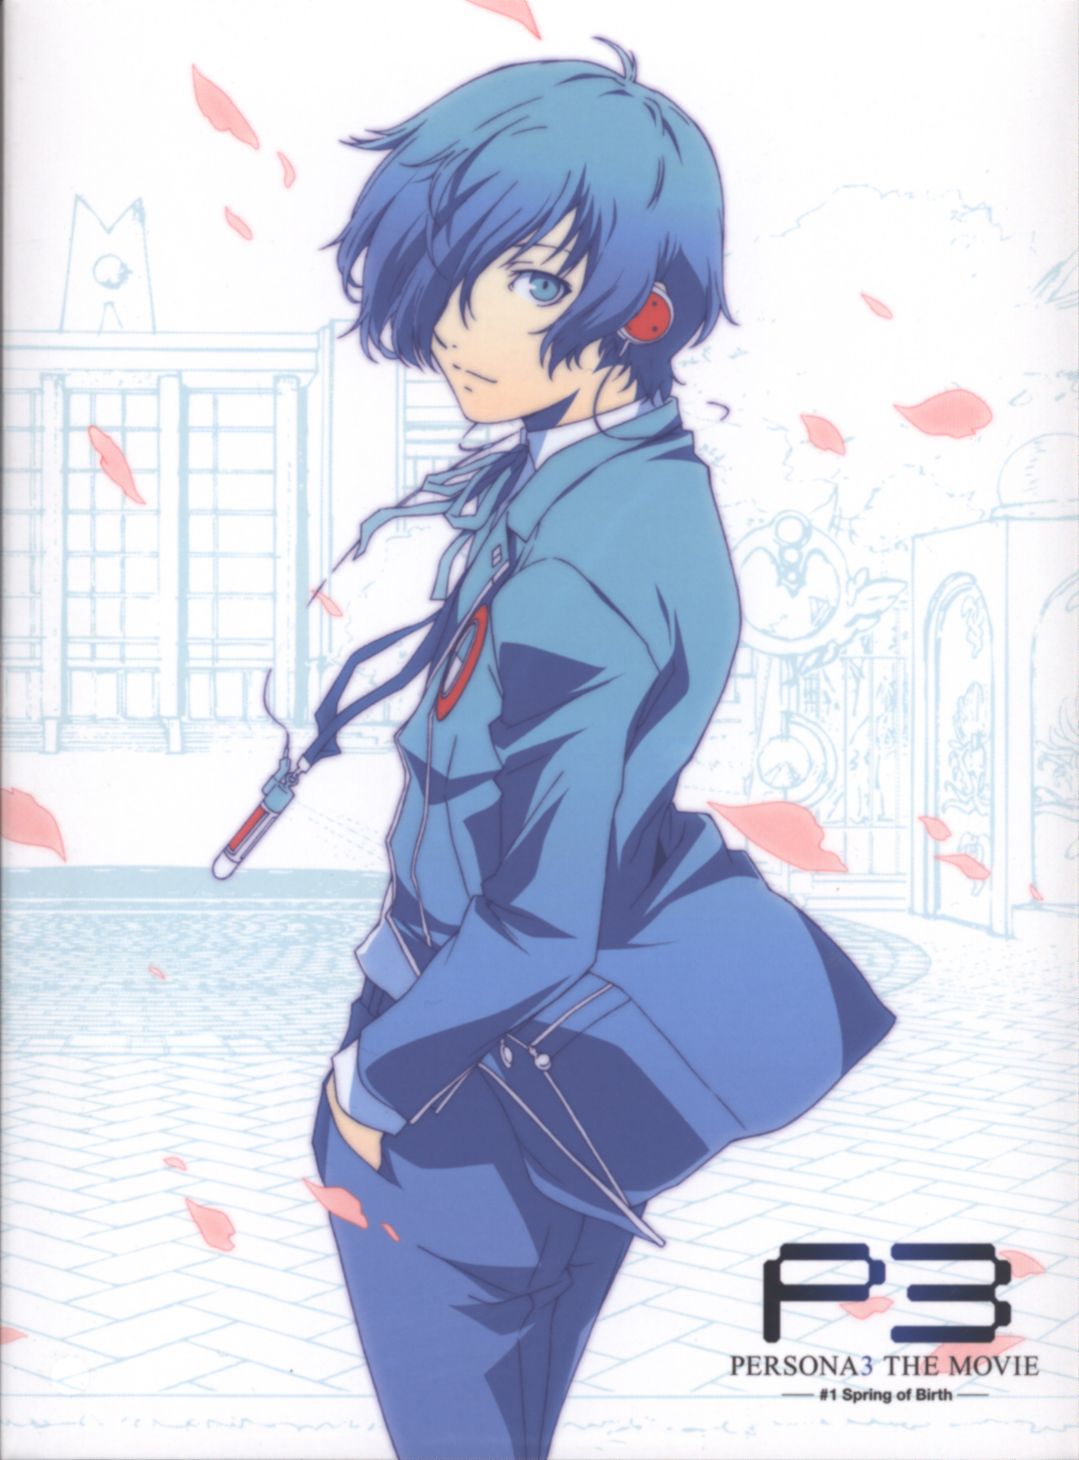 Movie Version Persona 3 PERSONA3 THE MOVIE # 1 Spring of Birth theme song  CD set ※ Unopened ・ CD only | Mandarake Online Shop